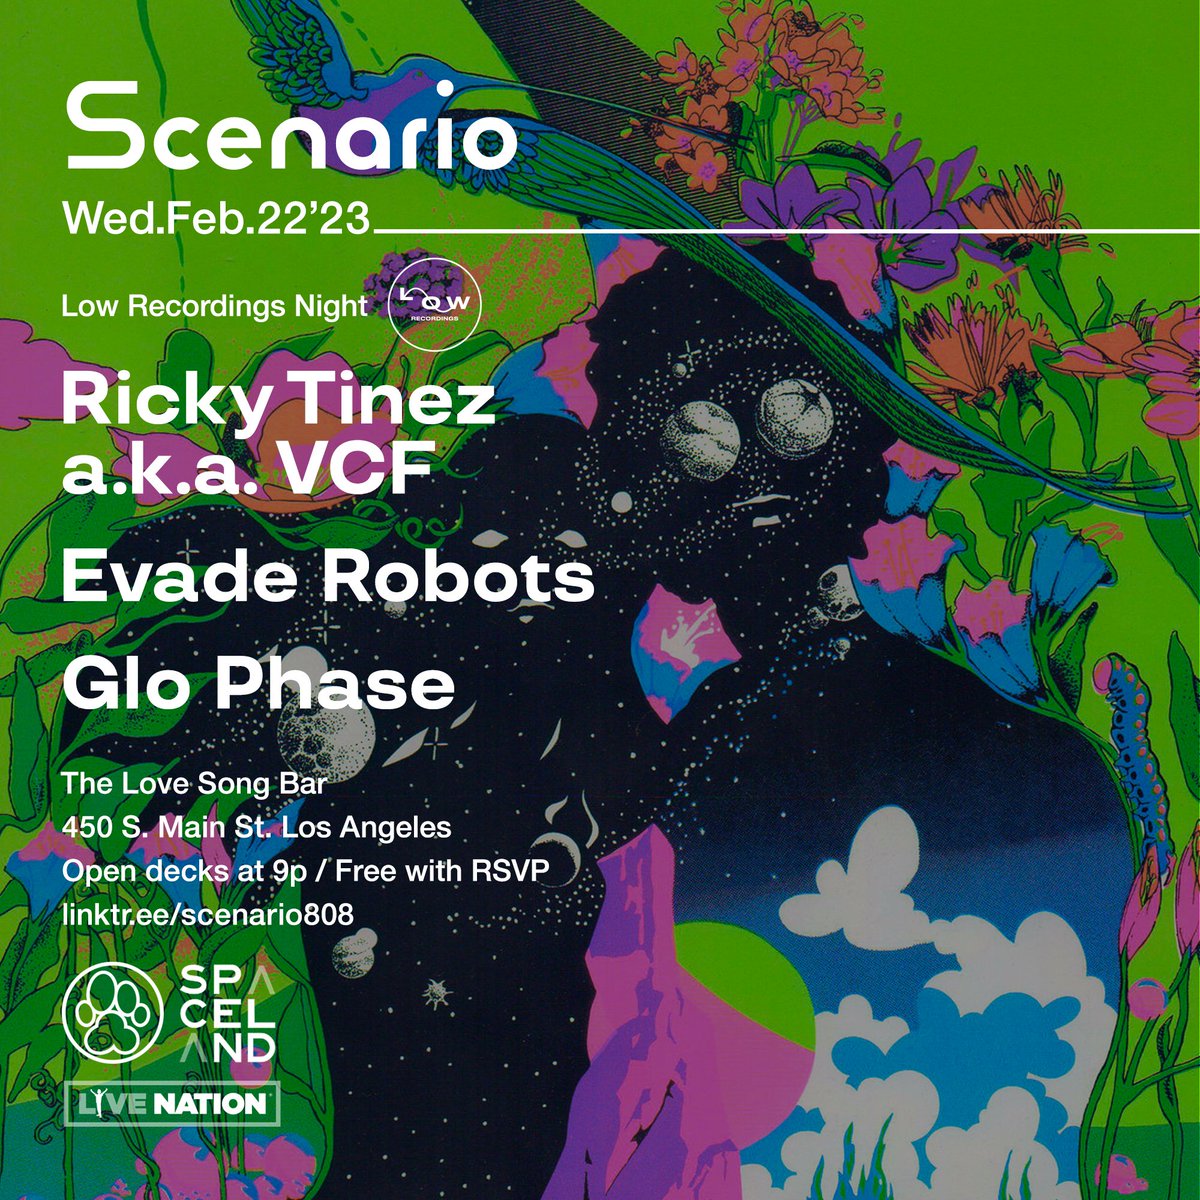 Tonight! @lowrecordings with @Ricky_Tinez @EvadeRobots @GloPhase + @daddykev at @TheLoveSongBar. Open decks at 9p. Free with RSVP. Presented by @ALPHAPUP @SpacelandLA @LiveNation 🔊✨👾 eventbrite.com/e/scenario-low…